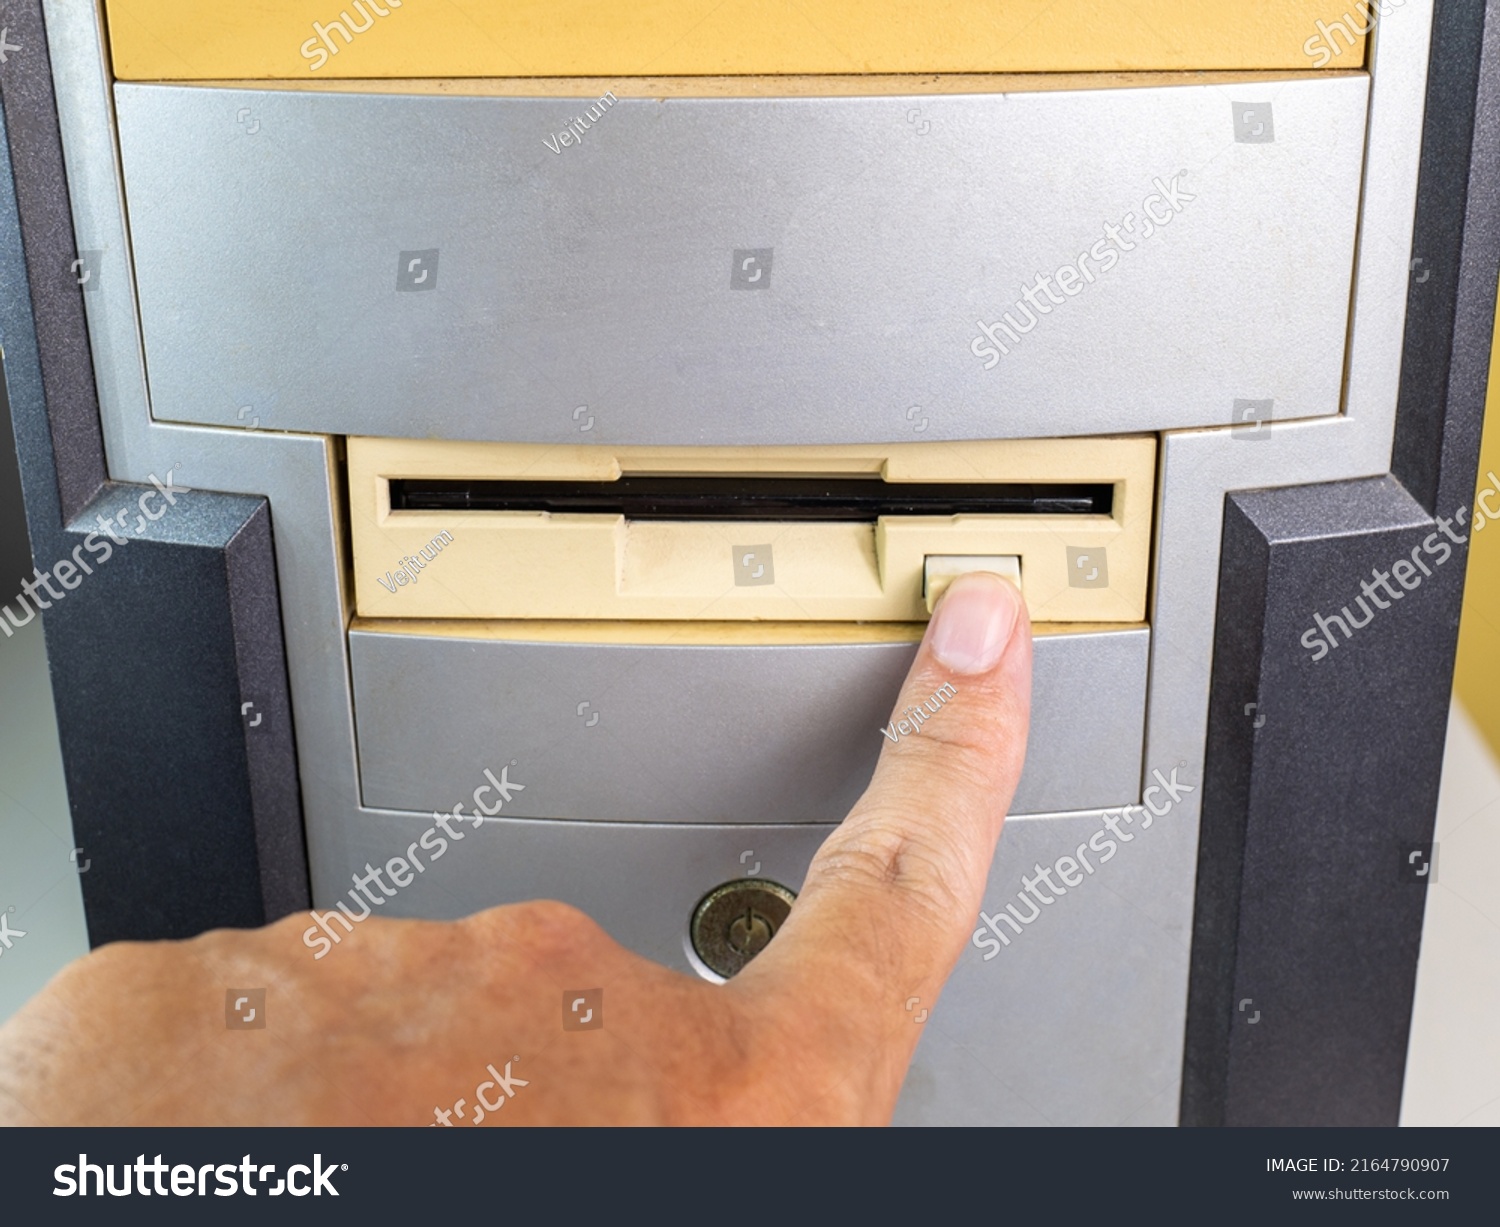 Stock Photo Hold The Floppy A Disc And Insert The Reader To Read And Write Data It S Technology Old That Have 2164790907 